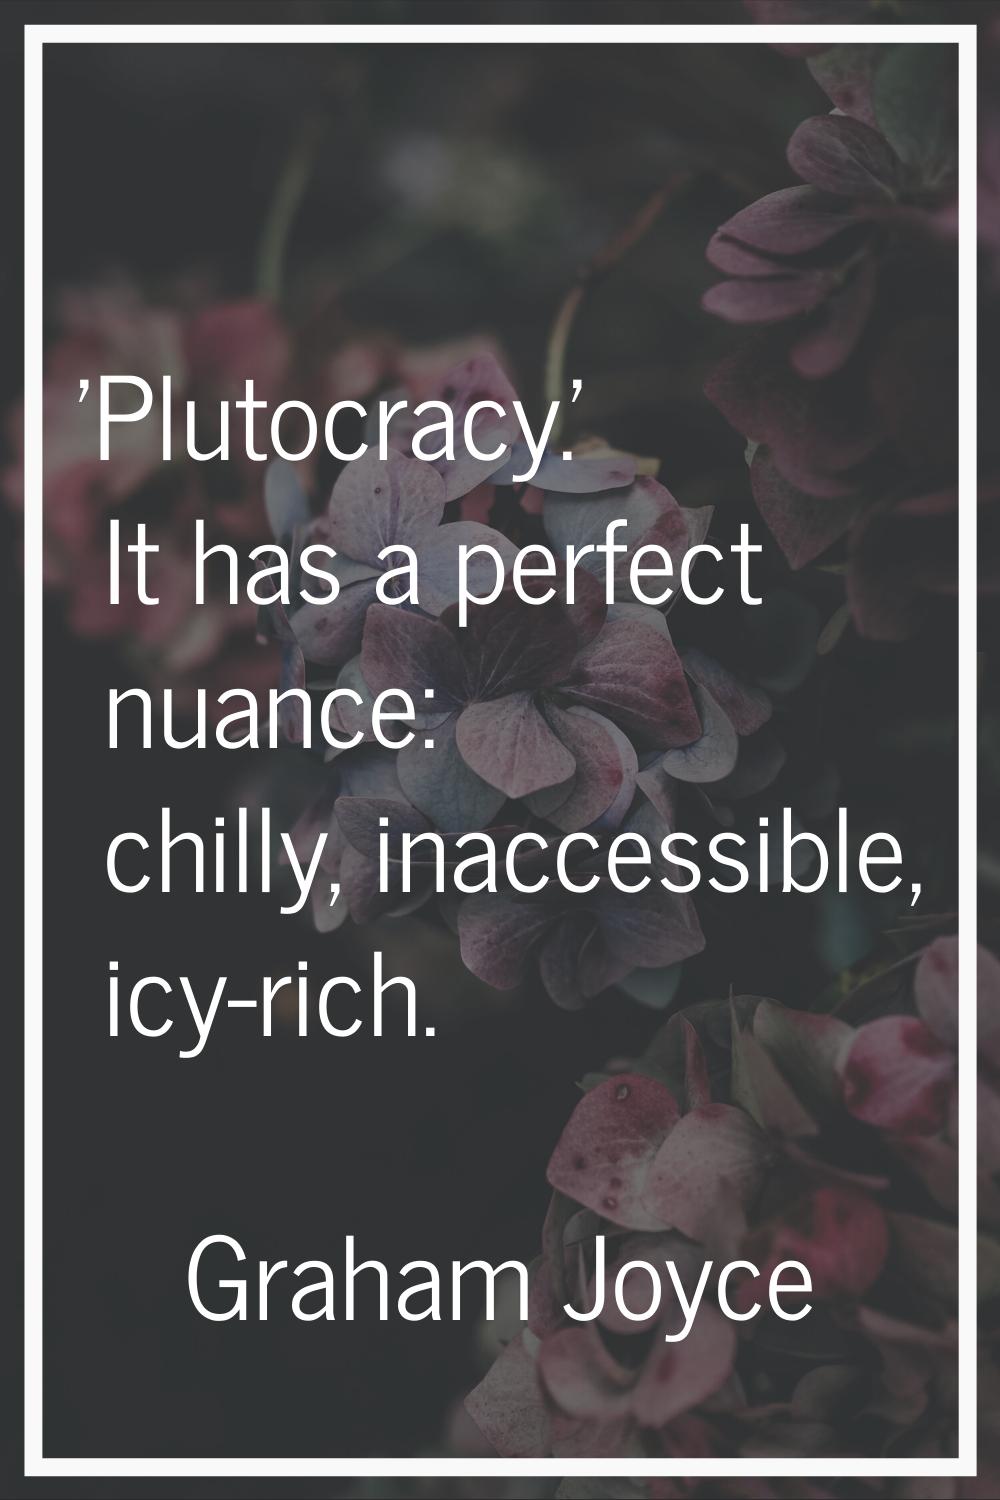 'Plutocracy.' It has a perfect nuance: chilly, inaccessible, icy-rich.